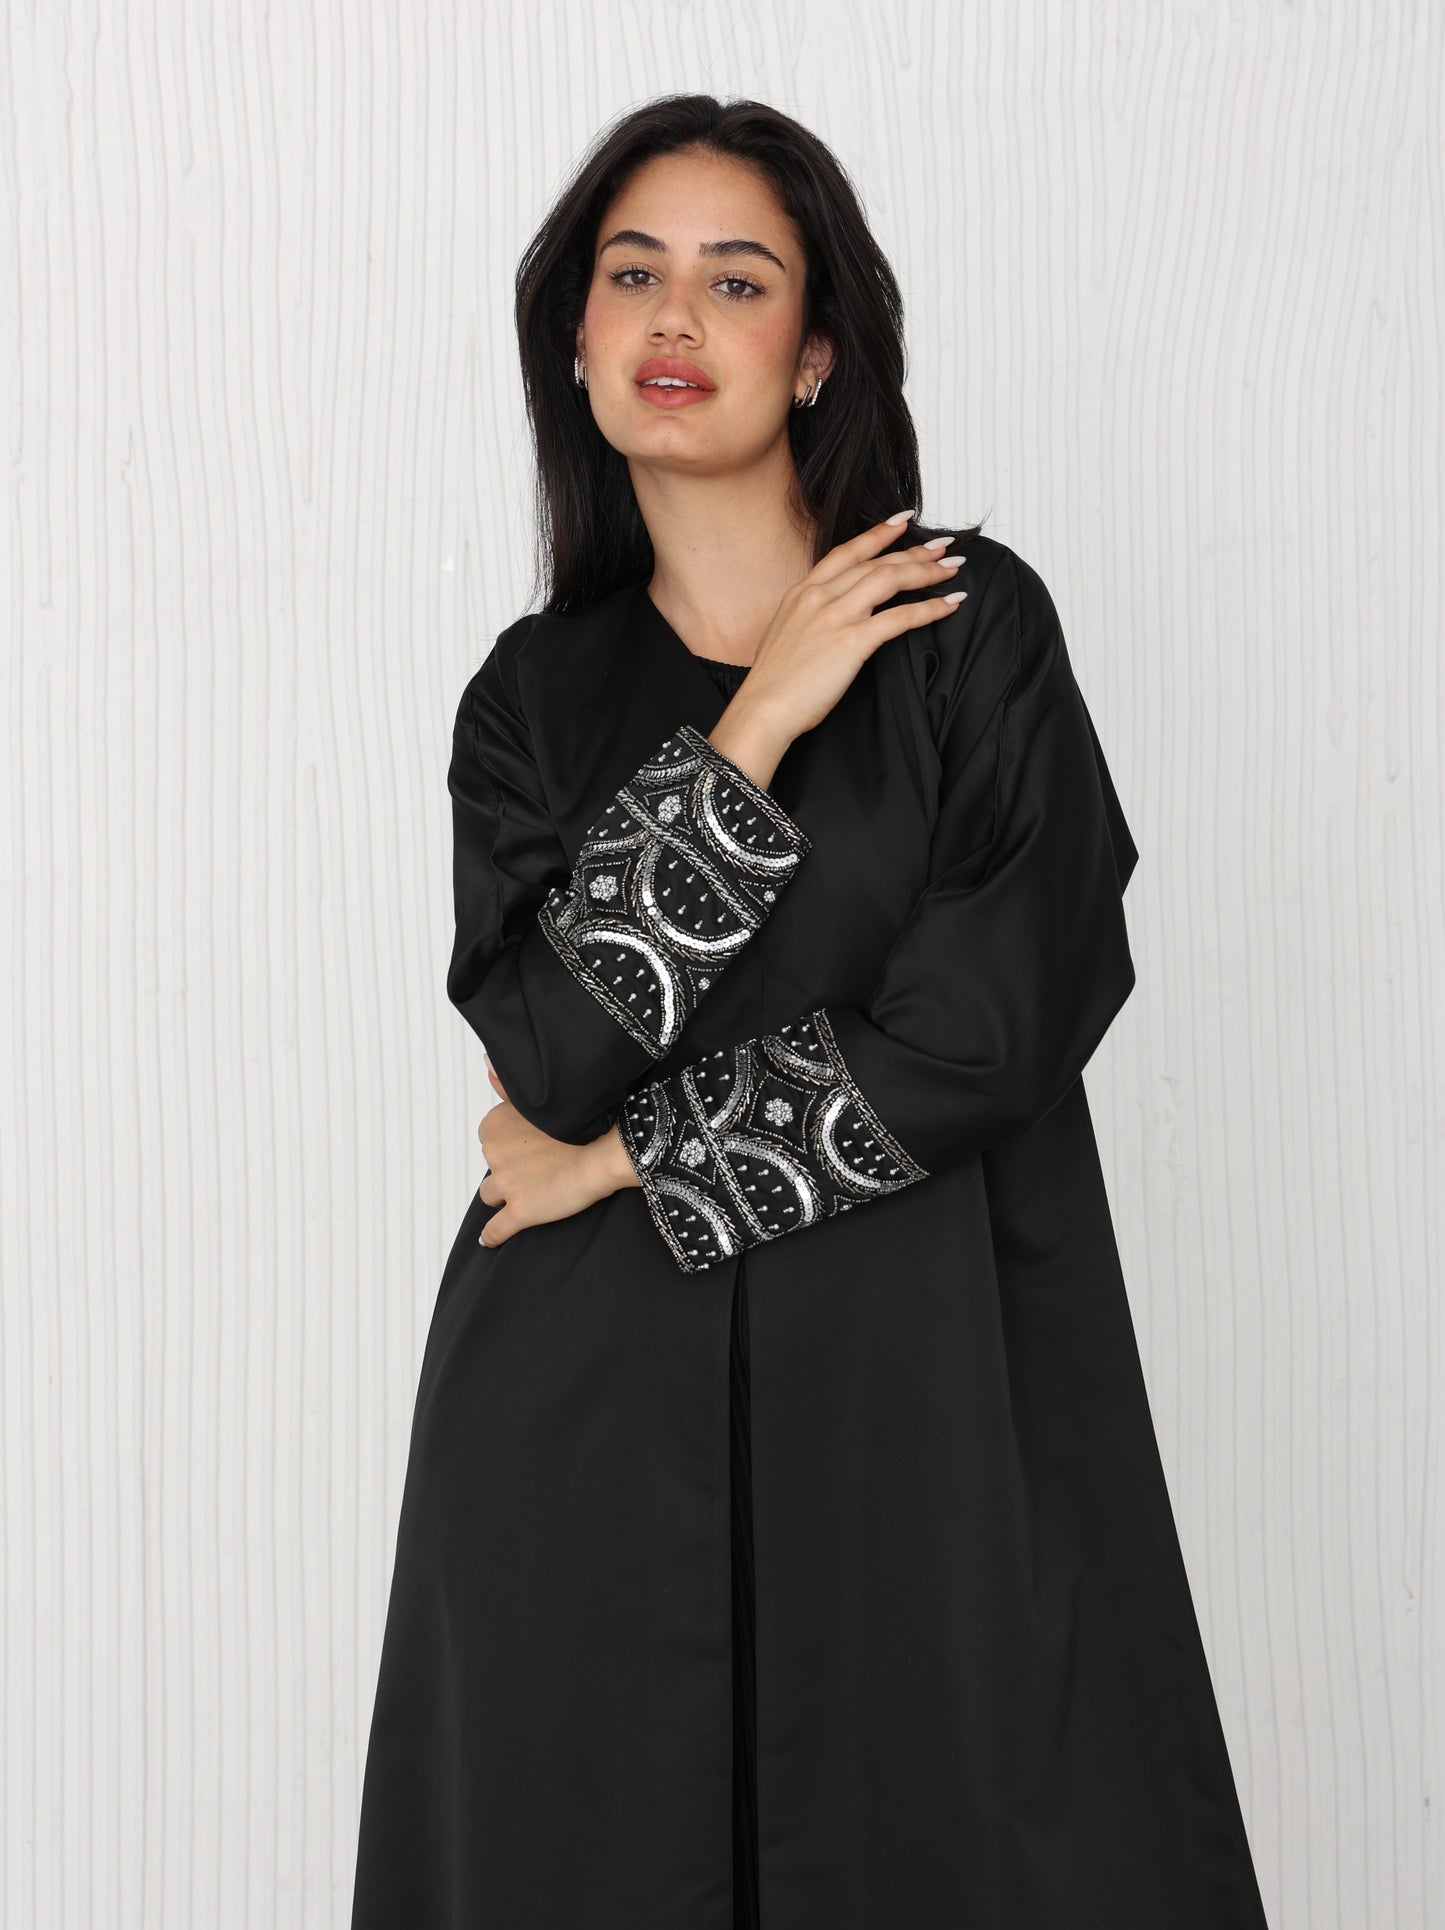 Black Bridal Satin Abaya with hand embroidery Detailing on sleeves